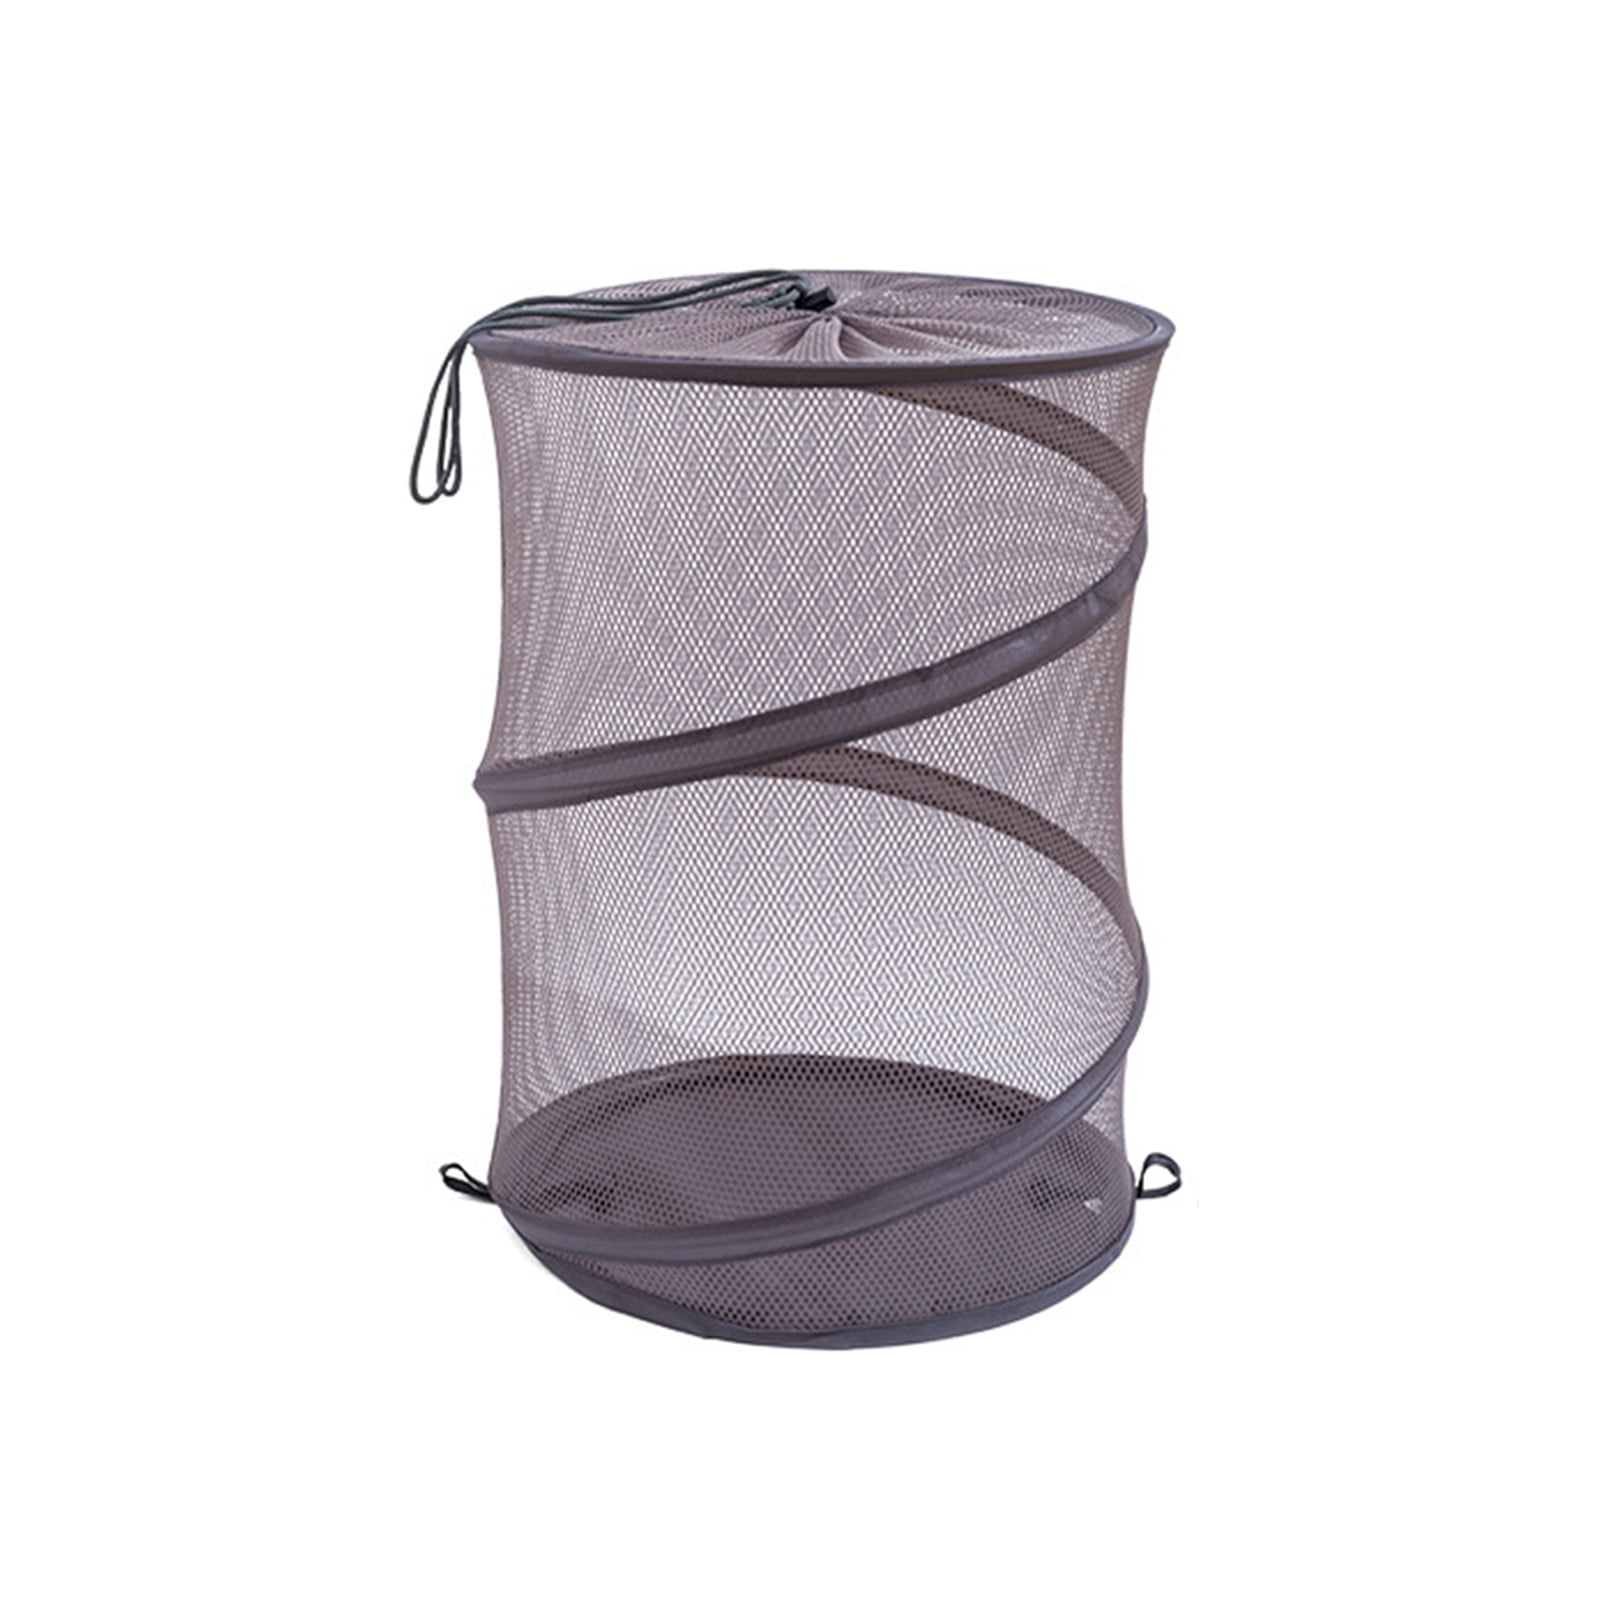 School Supplies Clearance! hoksml Home Storage Collapsible Mesh Popup Laundry  Hamper Foldable Dirty Clothes Basket Pop-Up Collapsible Mesh Laundry Hamper  Great For Kids Room/College Dorm/Travel 